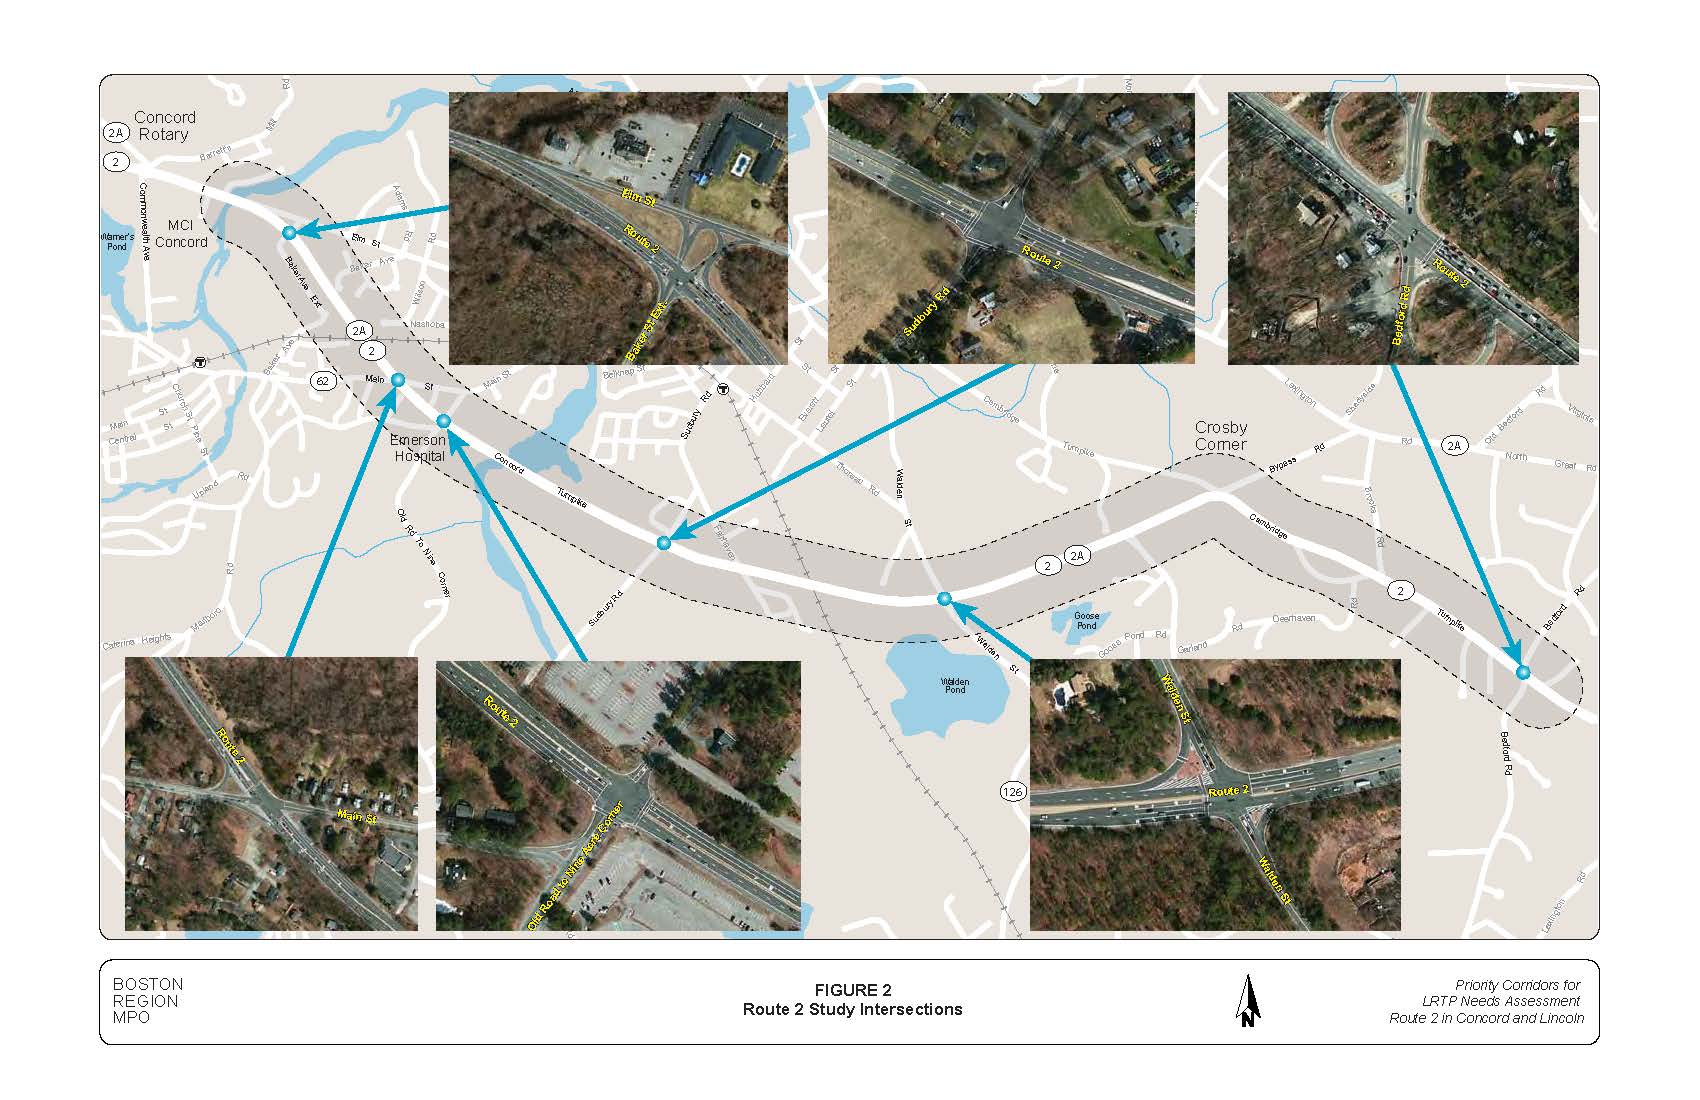 Figure 2 is a combination of maps and aerial photos that show the six intersections on Route 2 whose traffic signals were retimed.